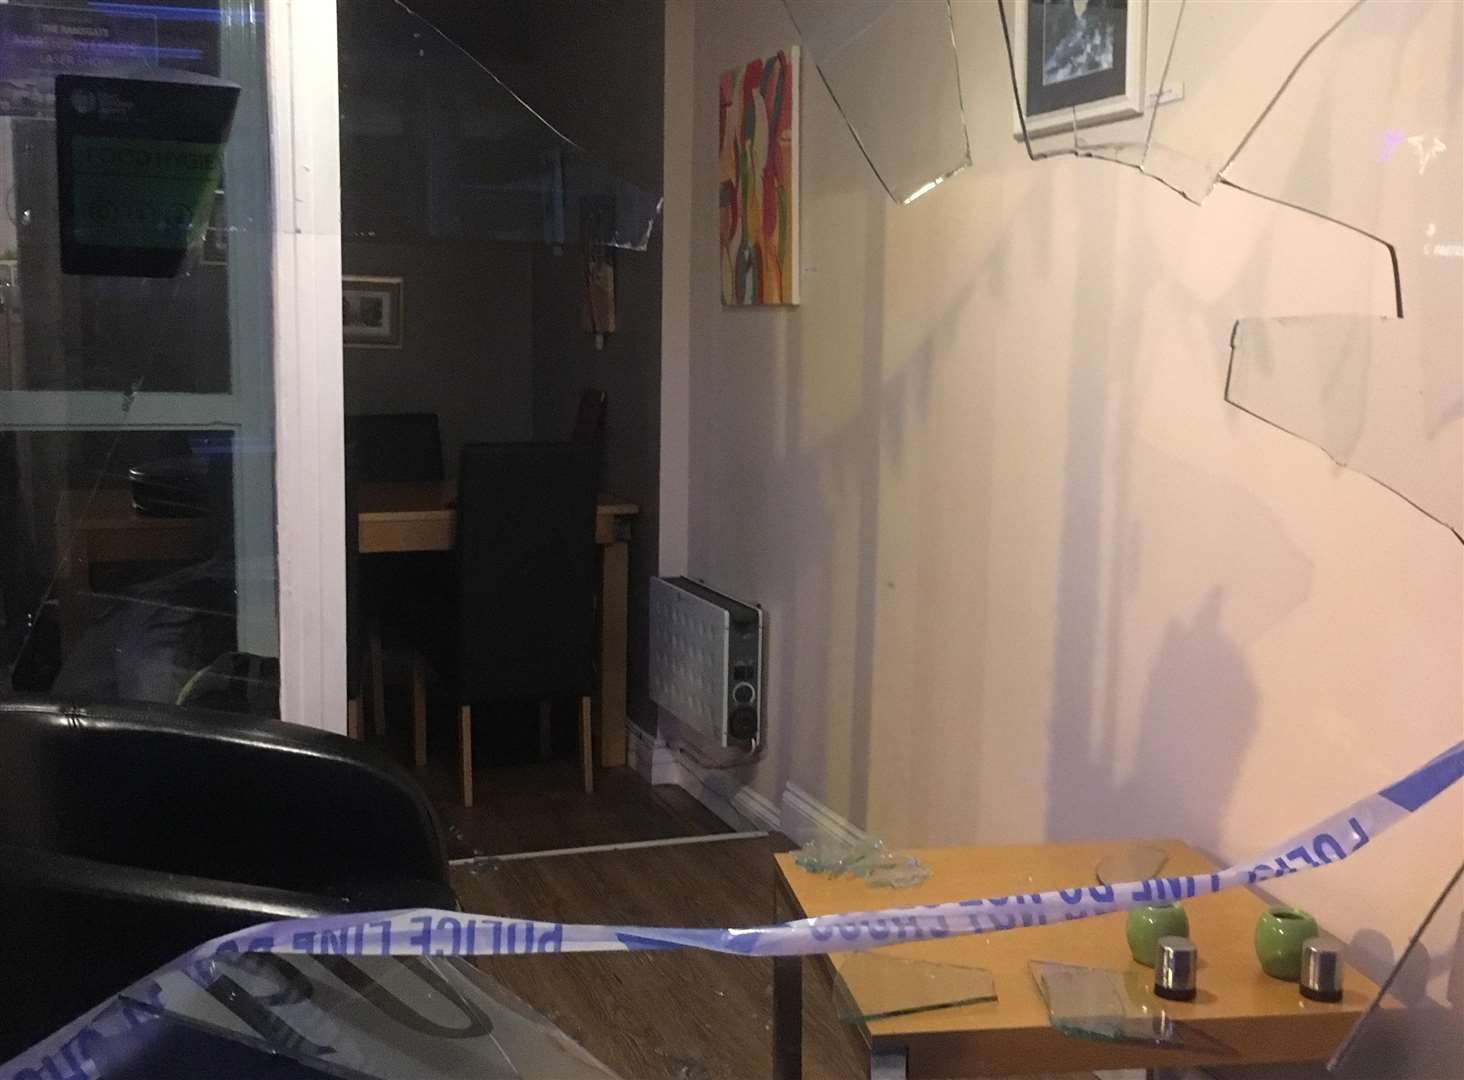 Smashed windows at The Daily Grind Cafe in Ramsgate